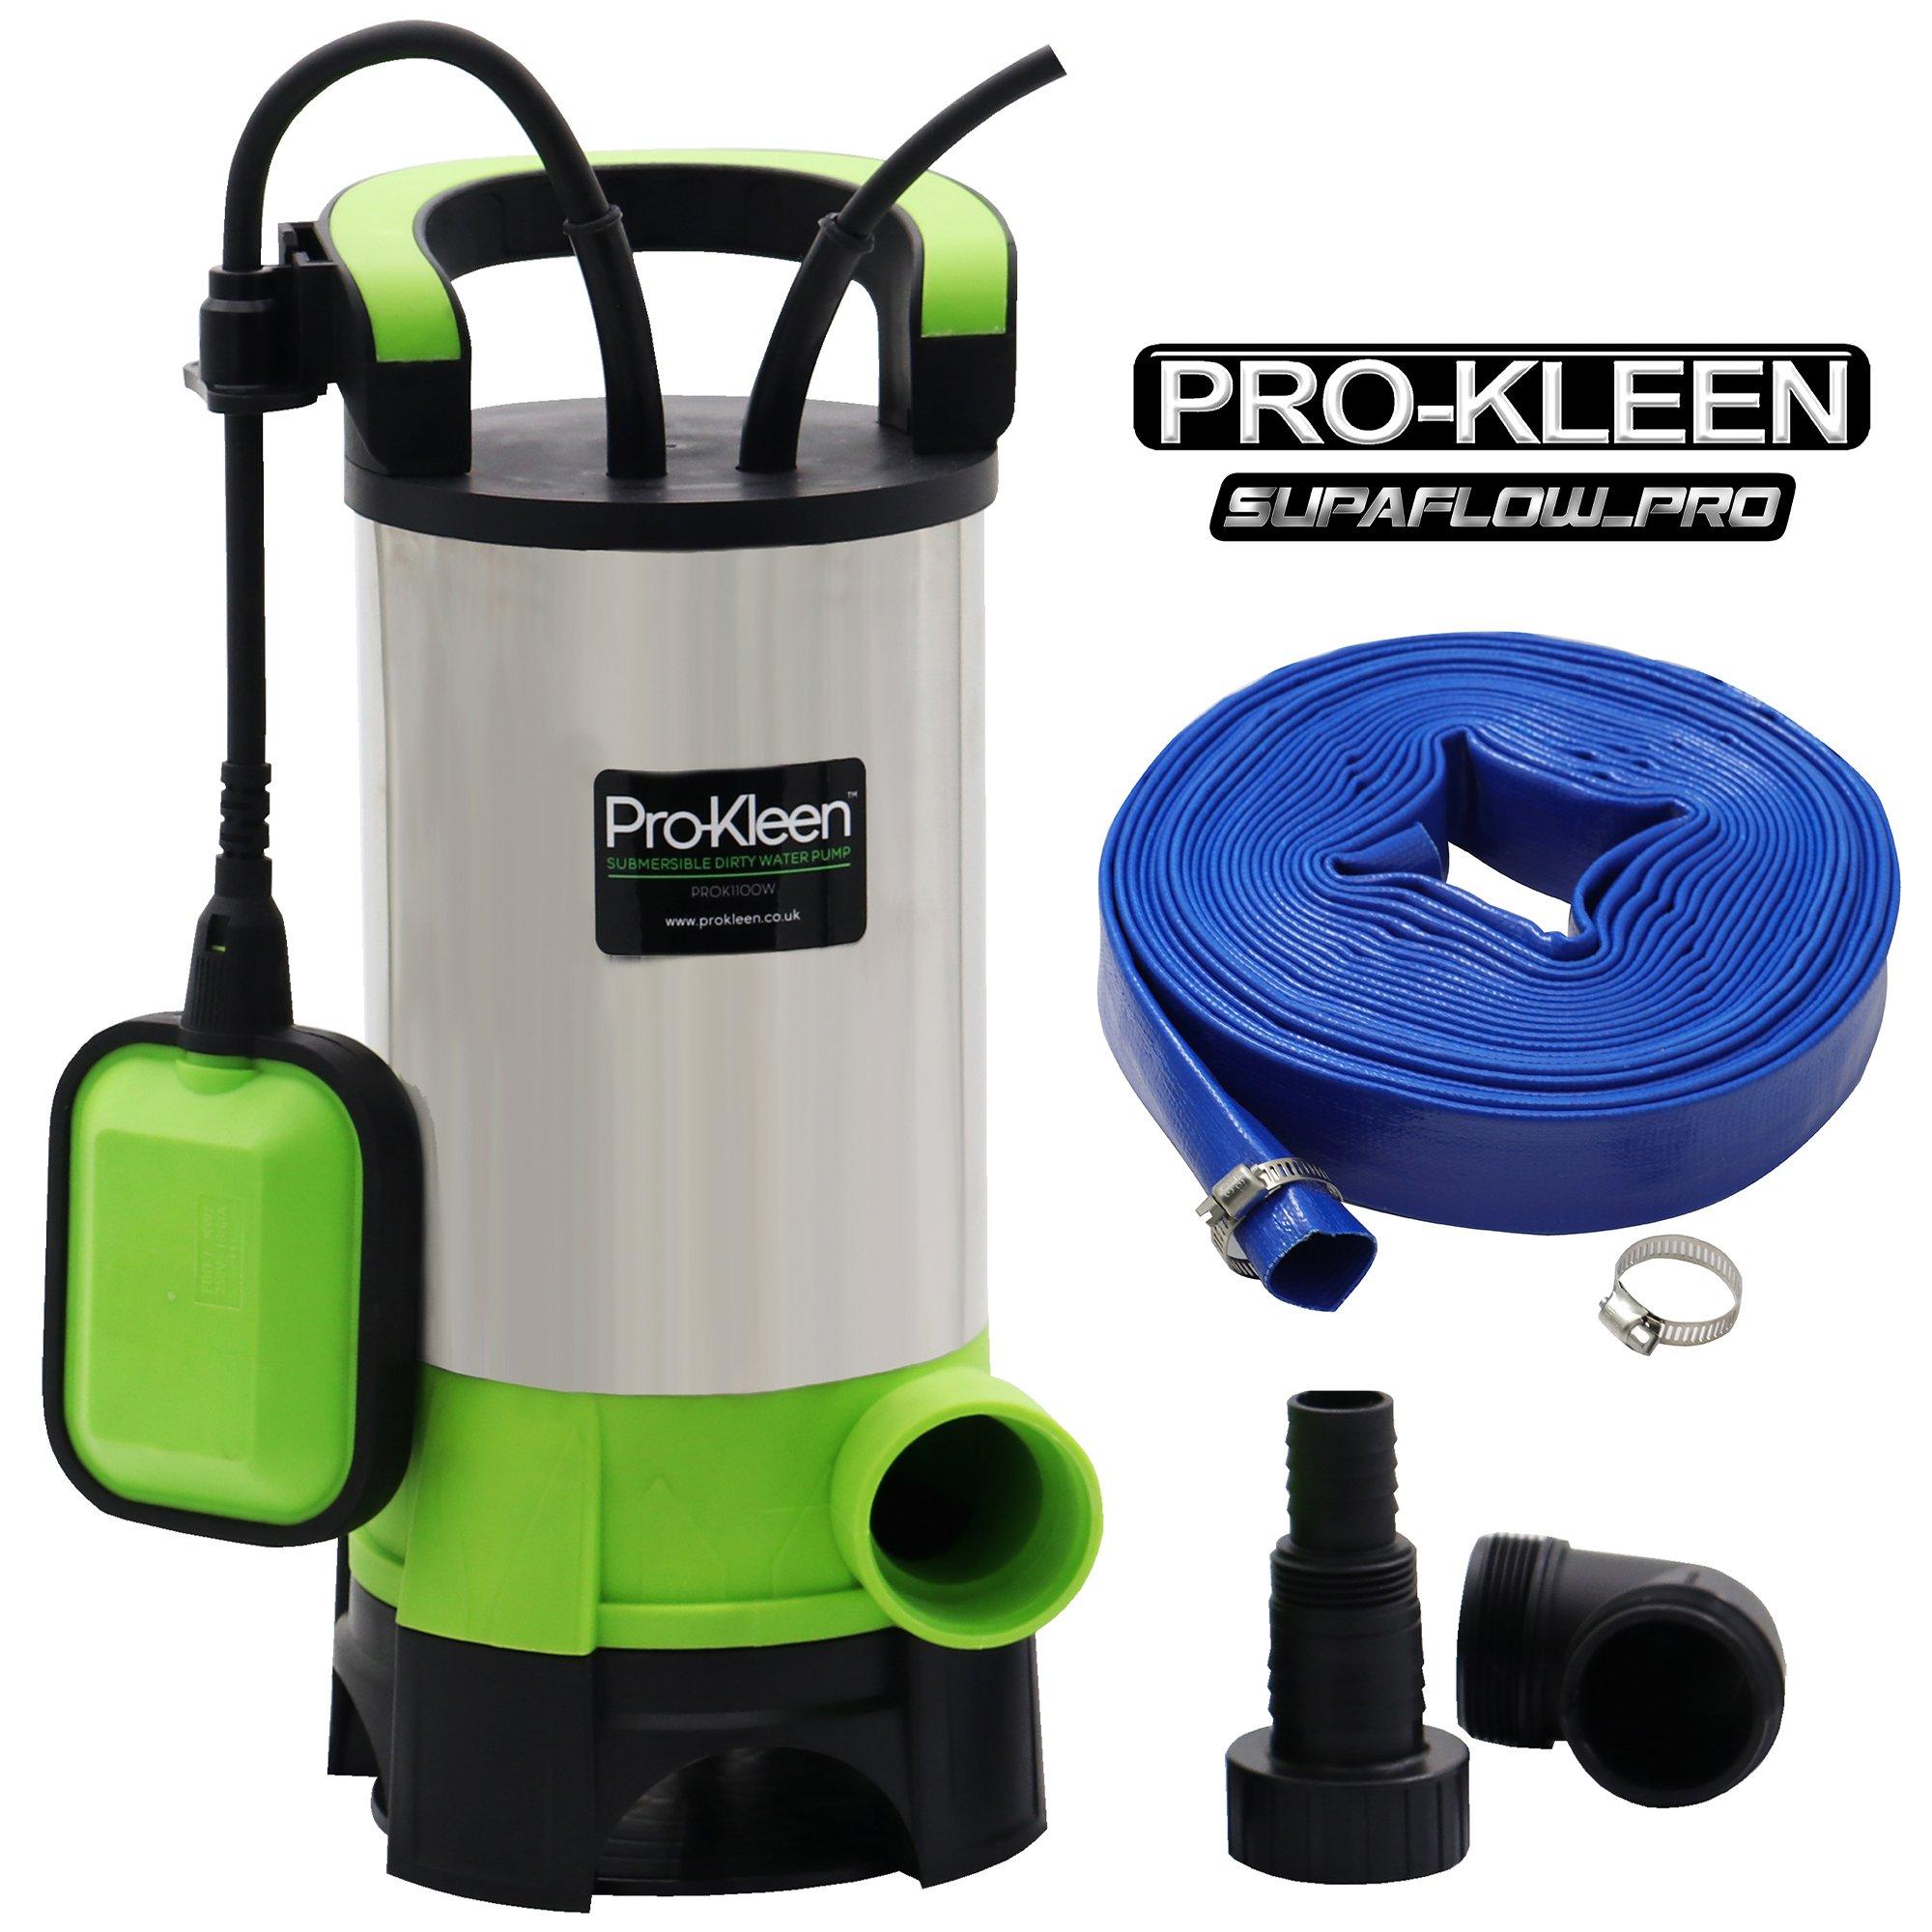 Electric Submersible Dirty or Clean Water Pump 1100W with 10M Hose